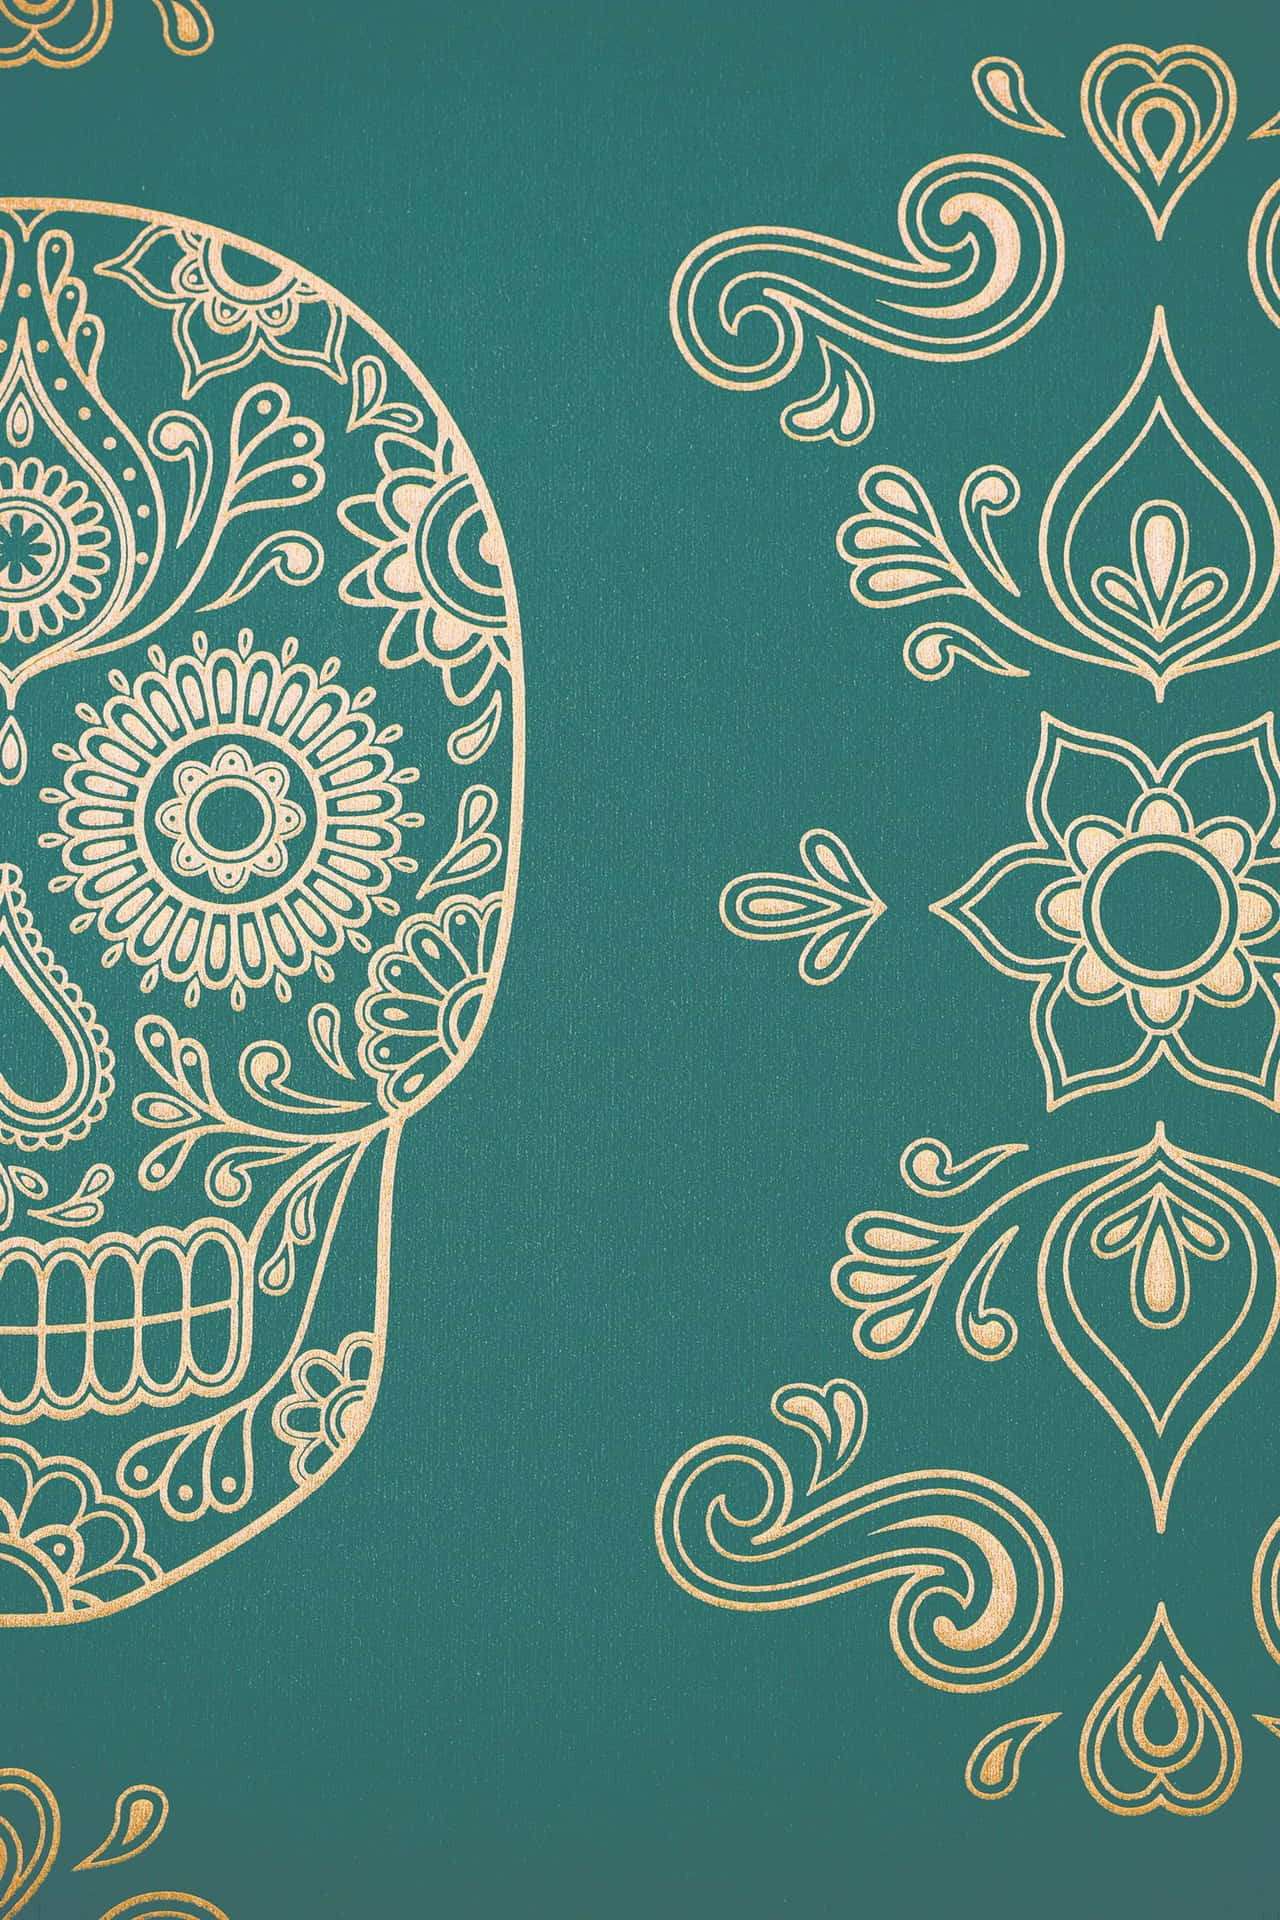 "Stay connected in style with a Sugar Skull Phone" Wallpaper